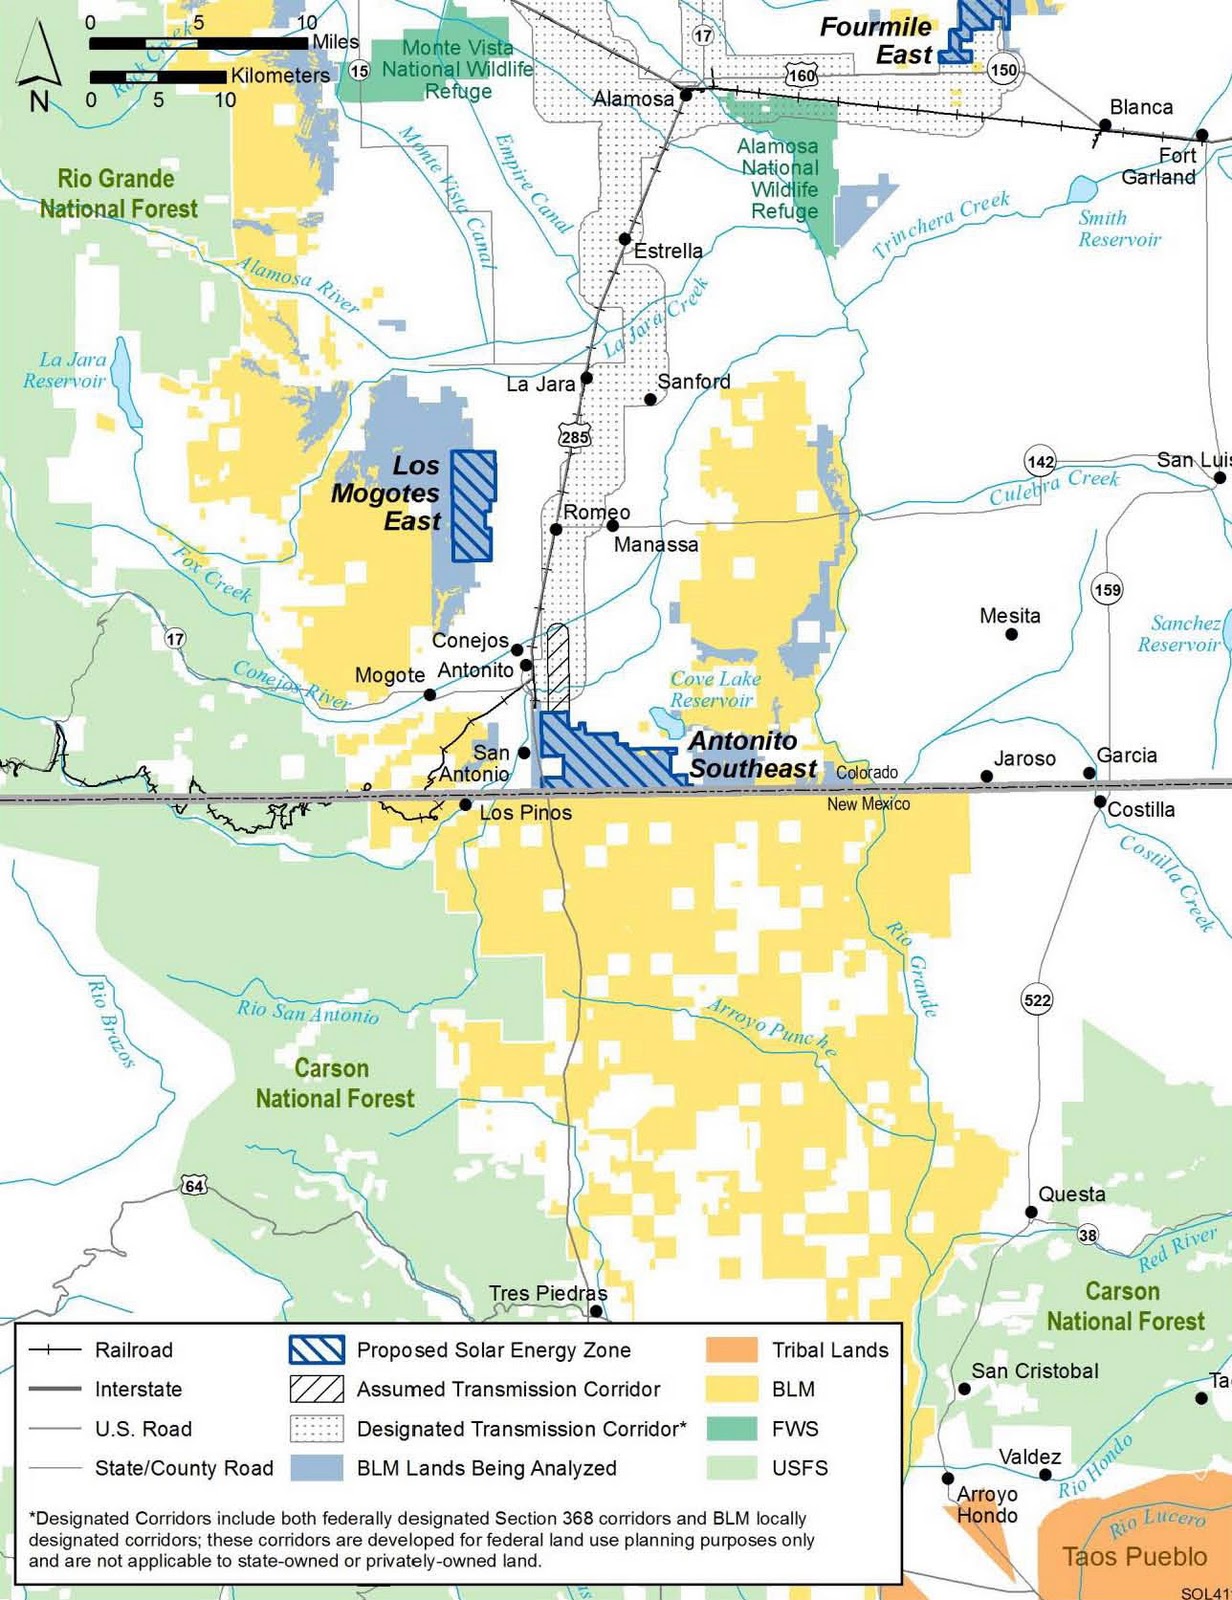 COLORADO MAP Supplement to the Draft Solar PEIS